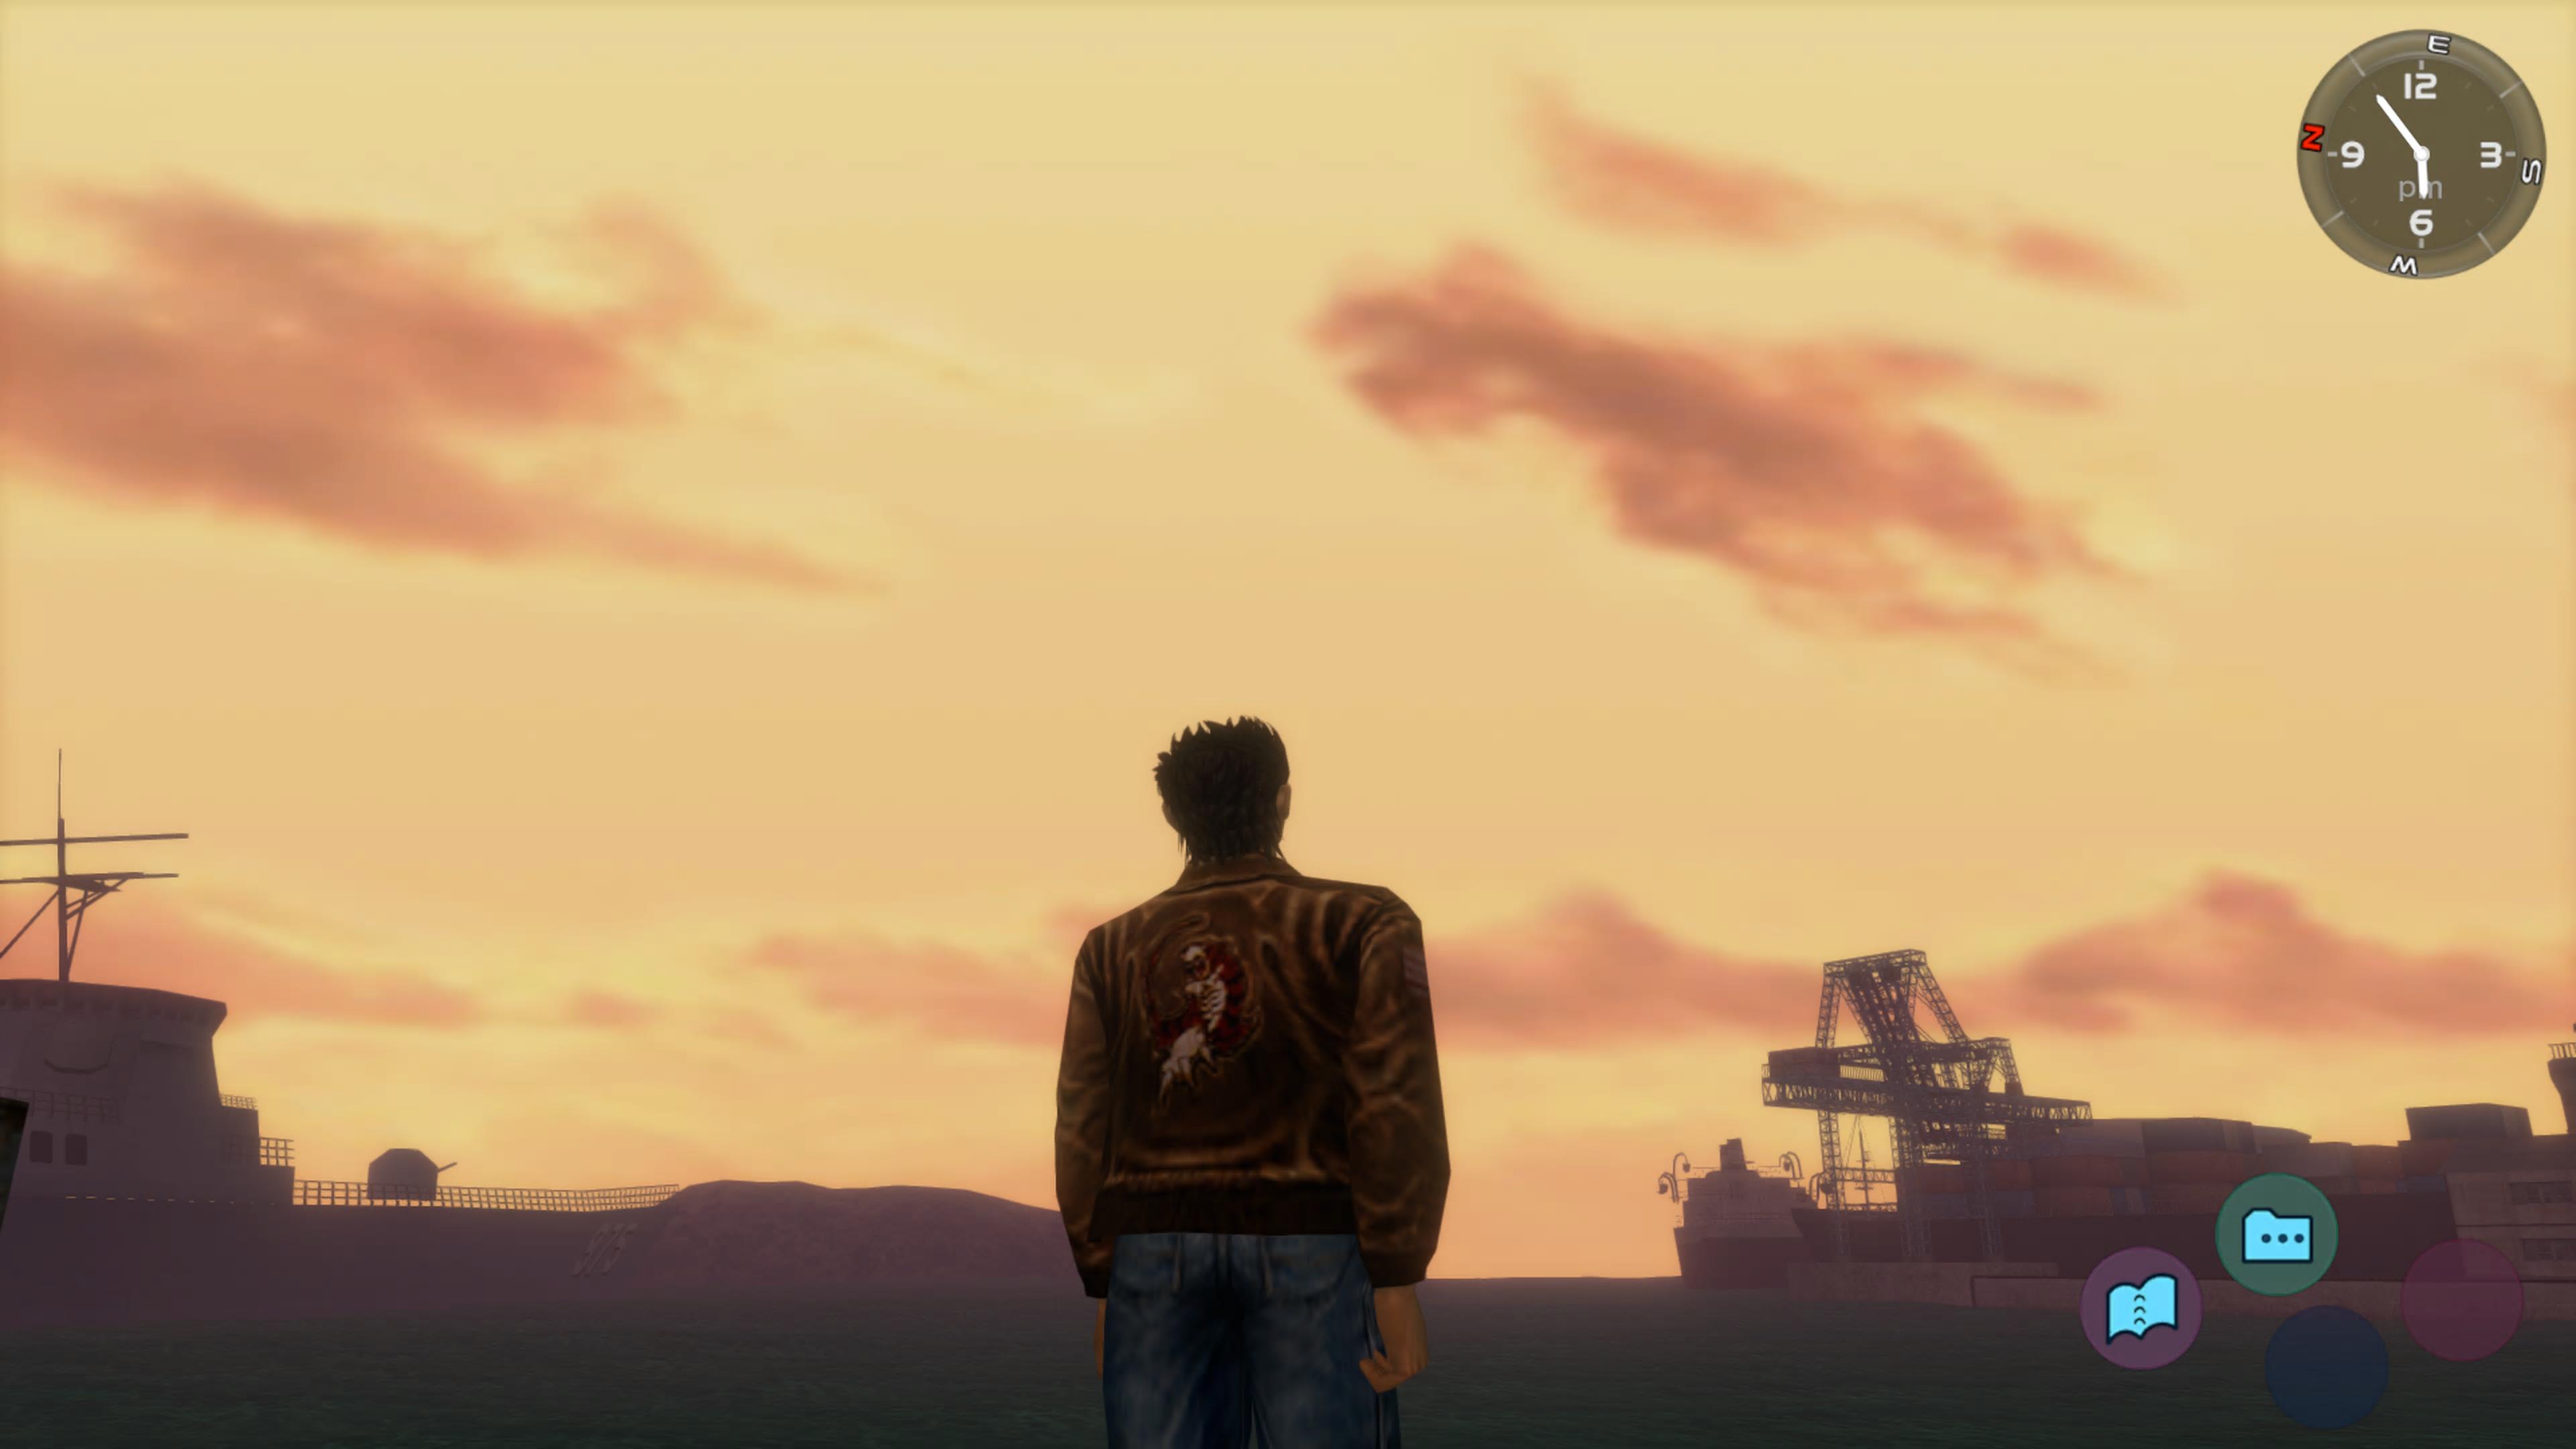 Ryo catching the sunset down at the docks